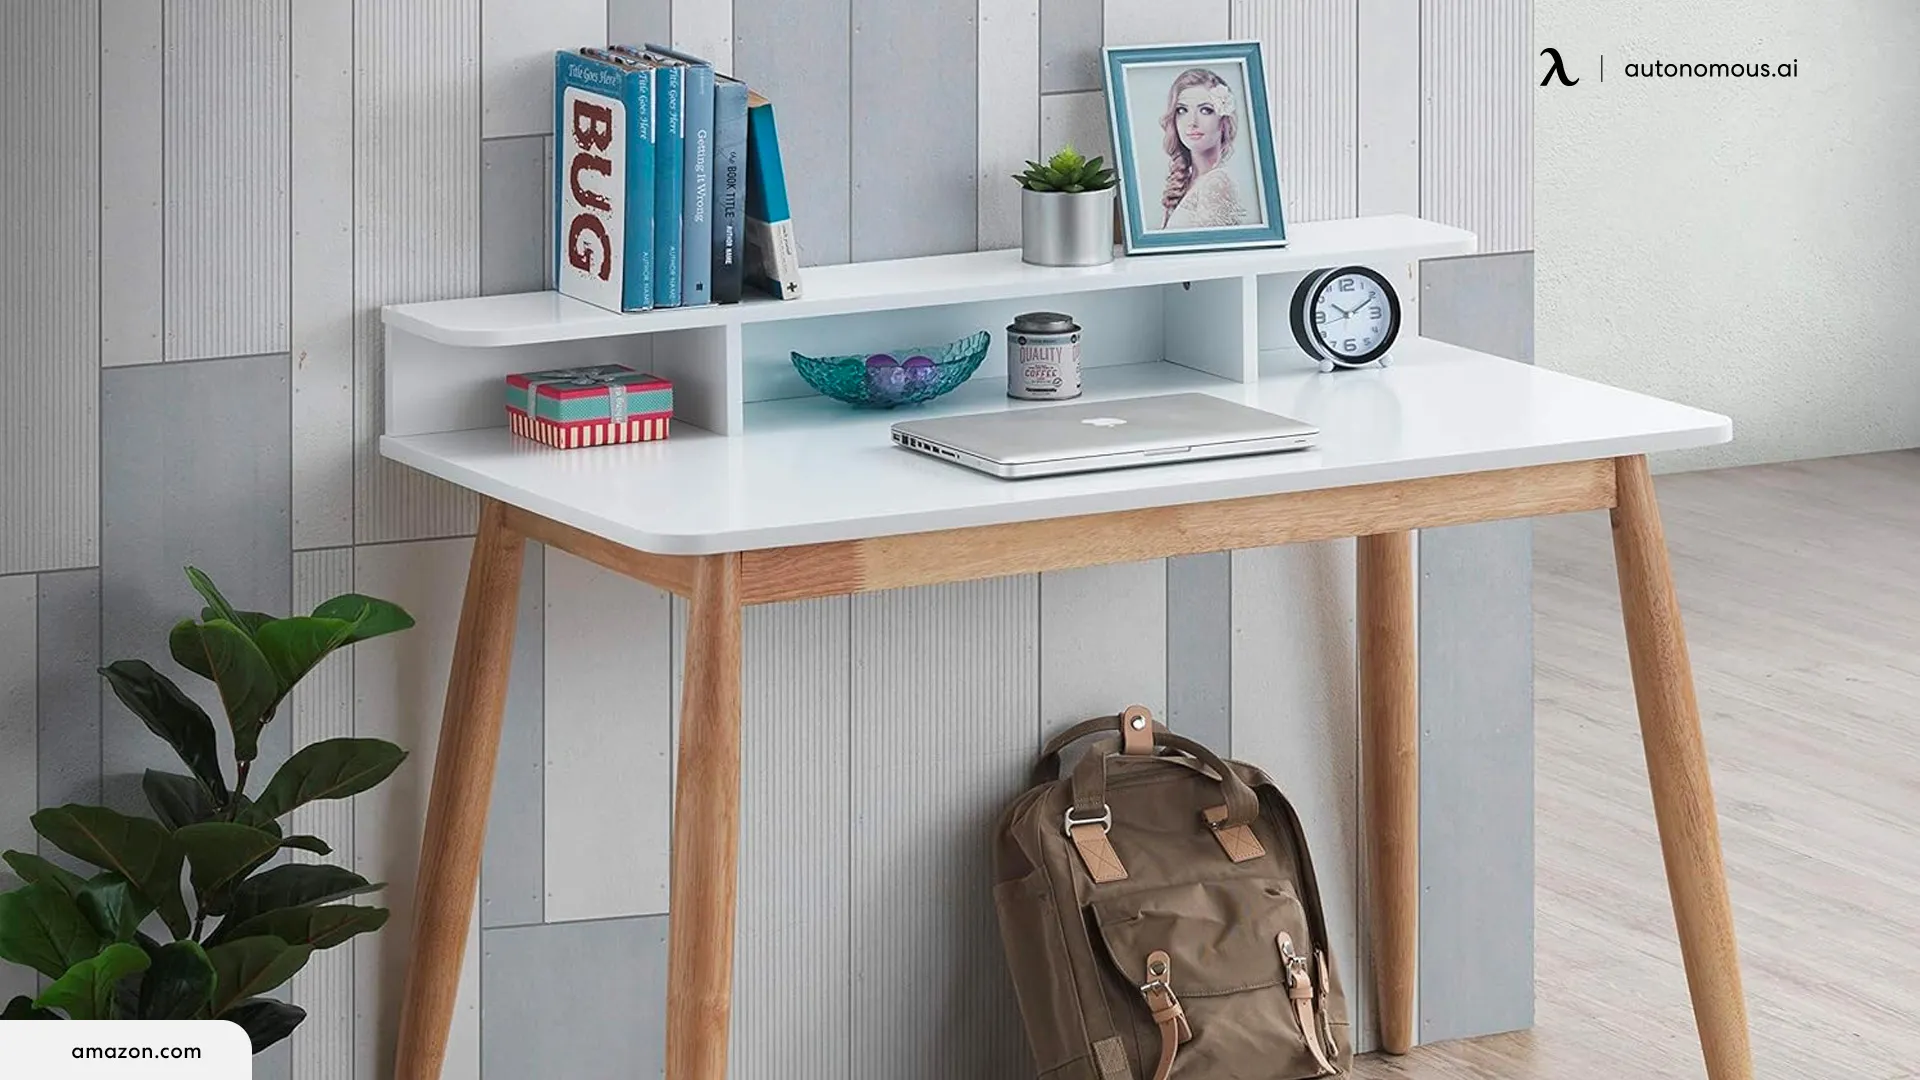 Extra Tips for Decorating a Home Office on a Budget